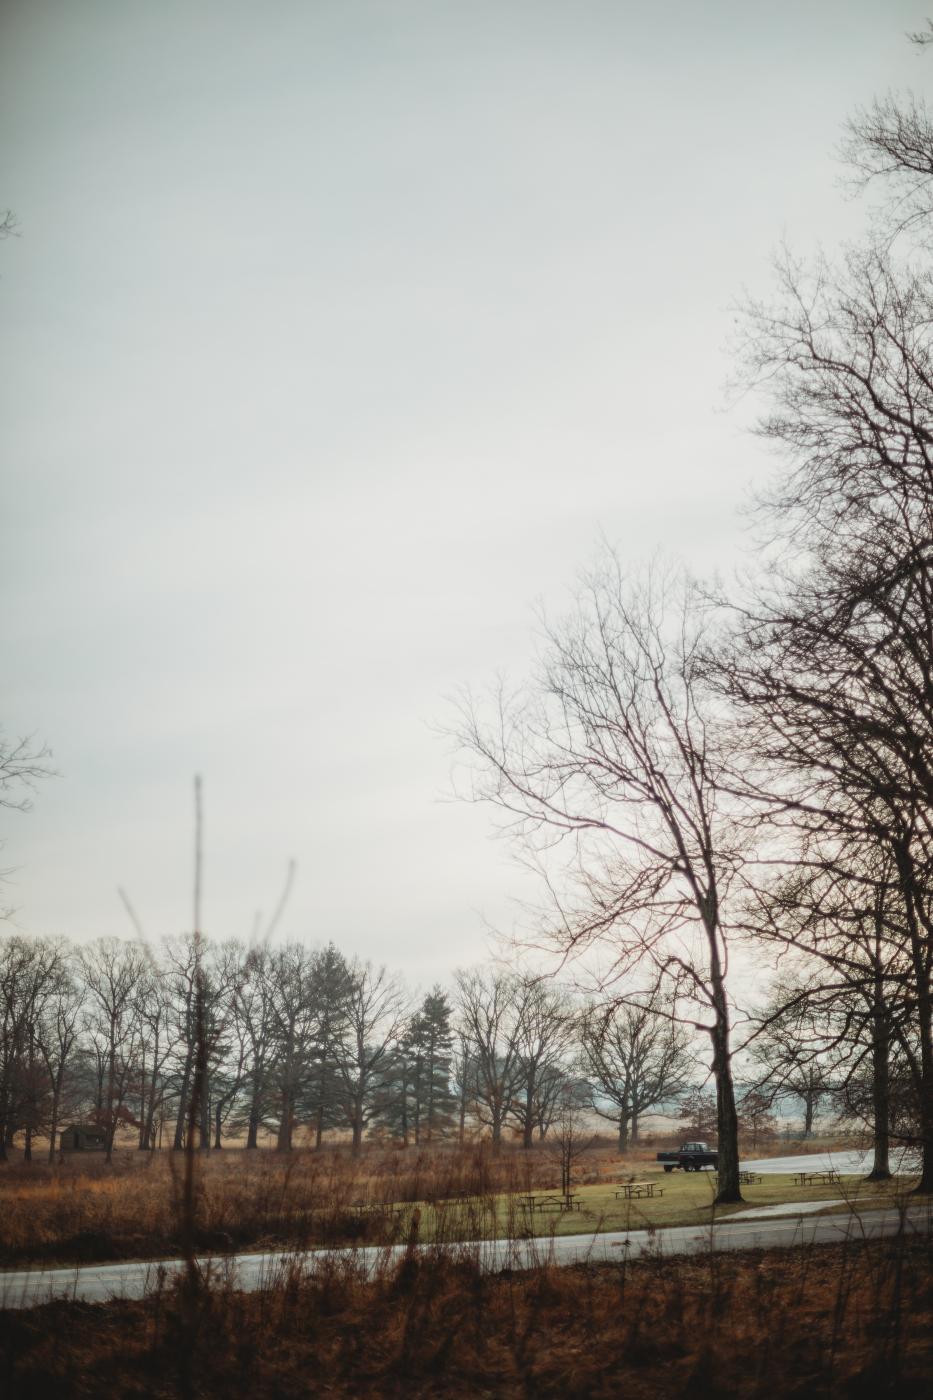 Valley Forge in Winter | Buy this image